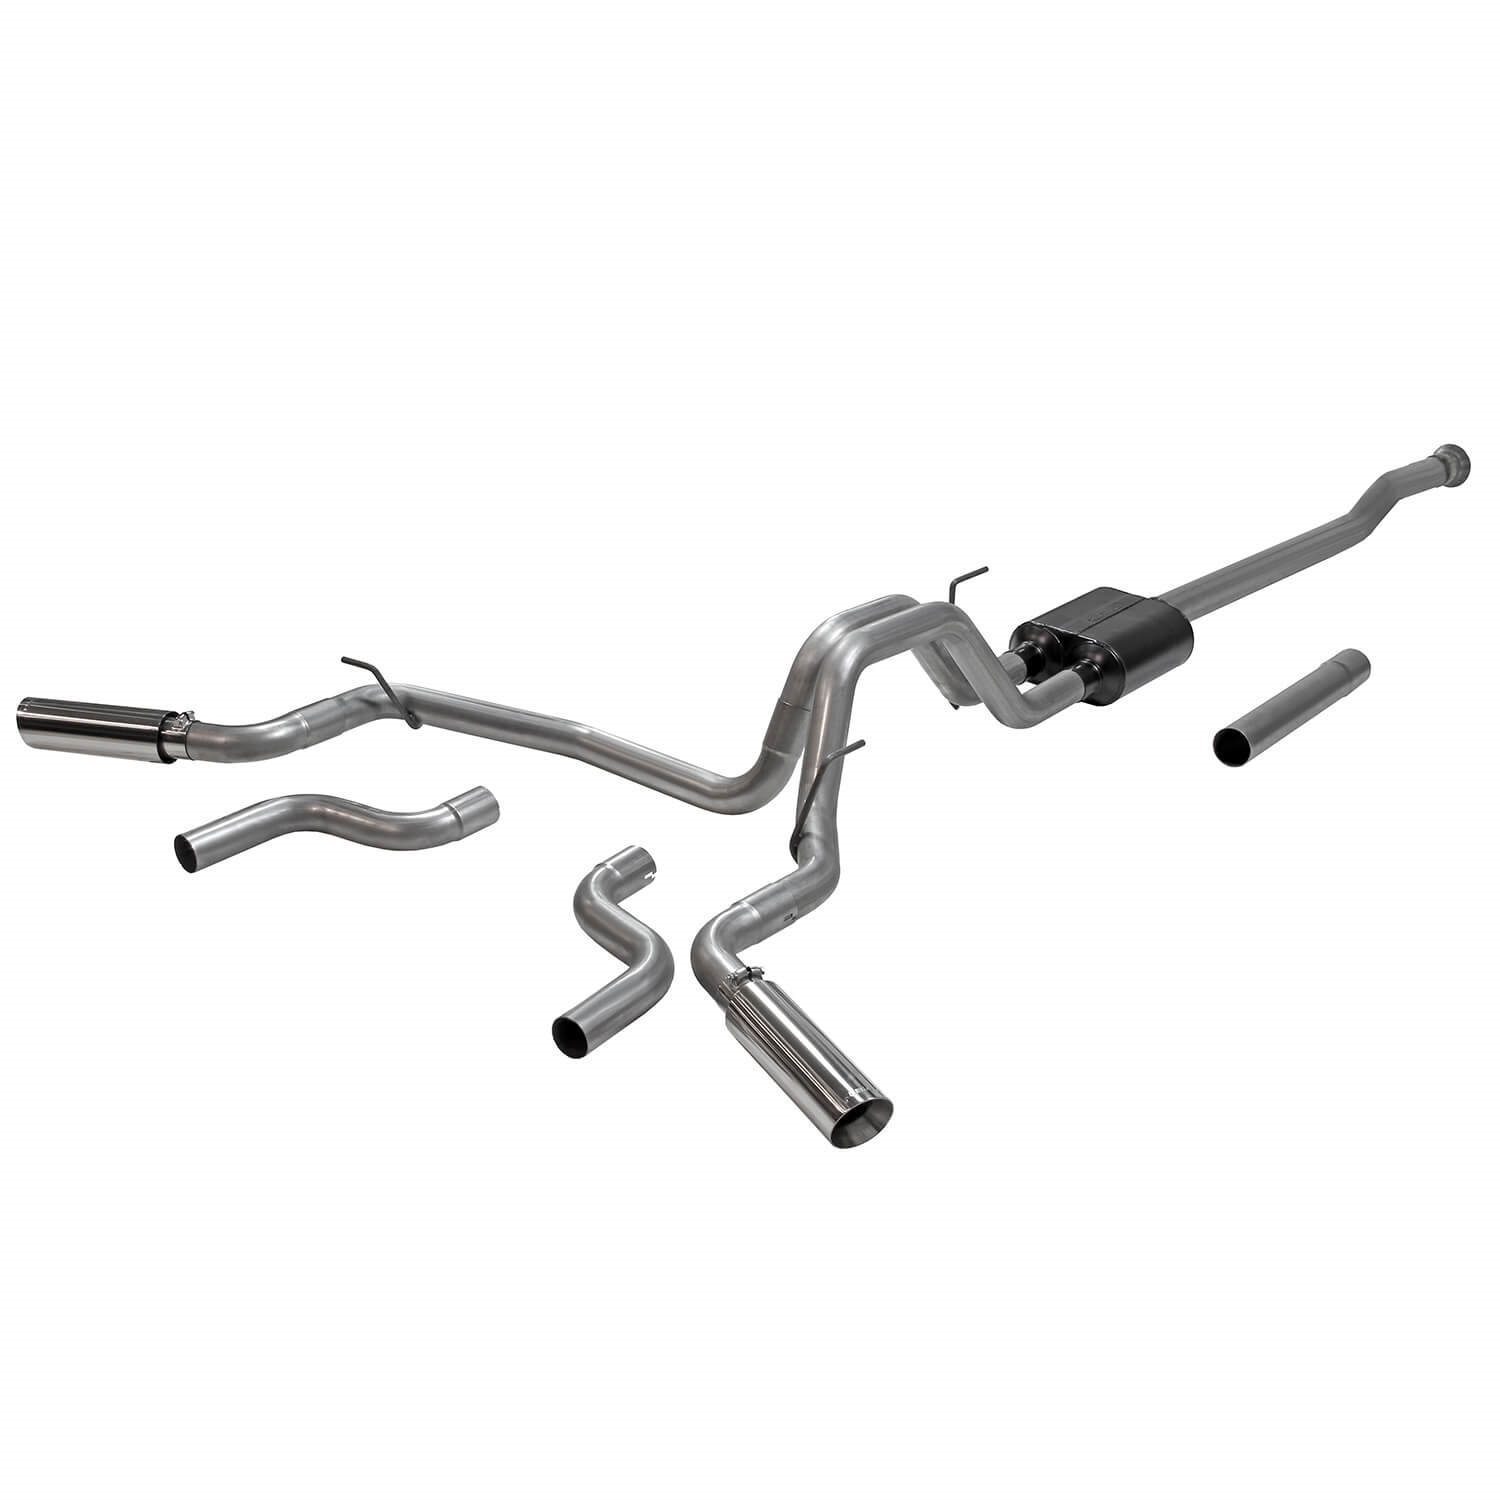 American Thunder Cat-Back Exhaust System Fits Select Ford F-150 2.7L, 3.5L, 5.0L